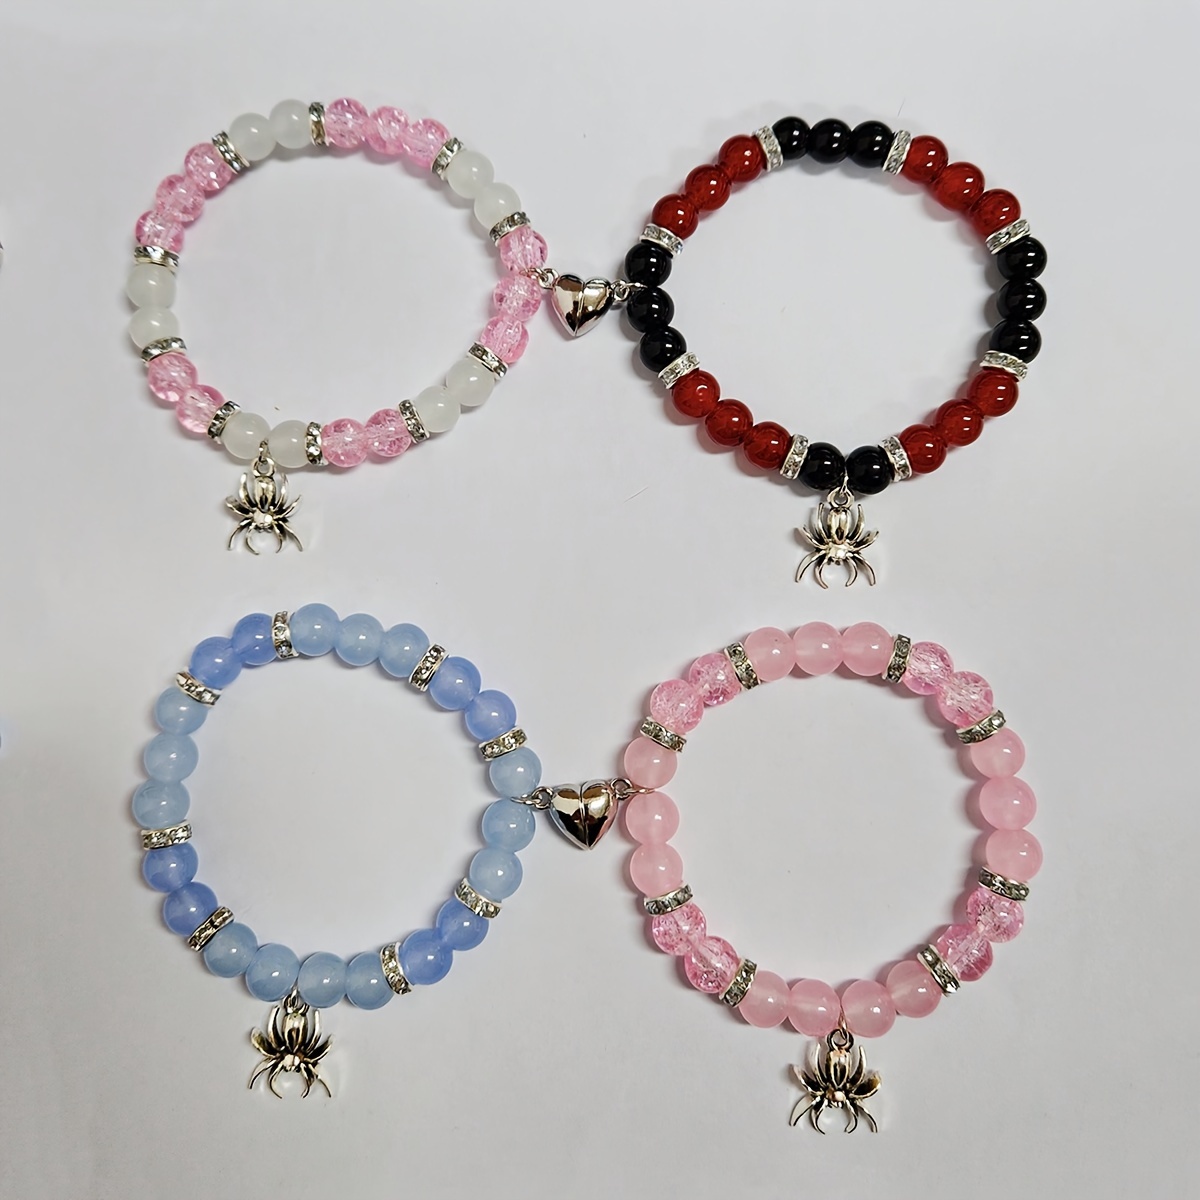 

Set Of 4pcs Colored Beaded Matching Bracelets For Couples, Spider Lovers Bracelets Heart Charm Bracelets Jewelry Gifts, Long Distance Relationship Gifts For Gf Bf Soulmate Valentine's Day Gift